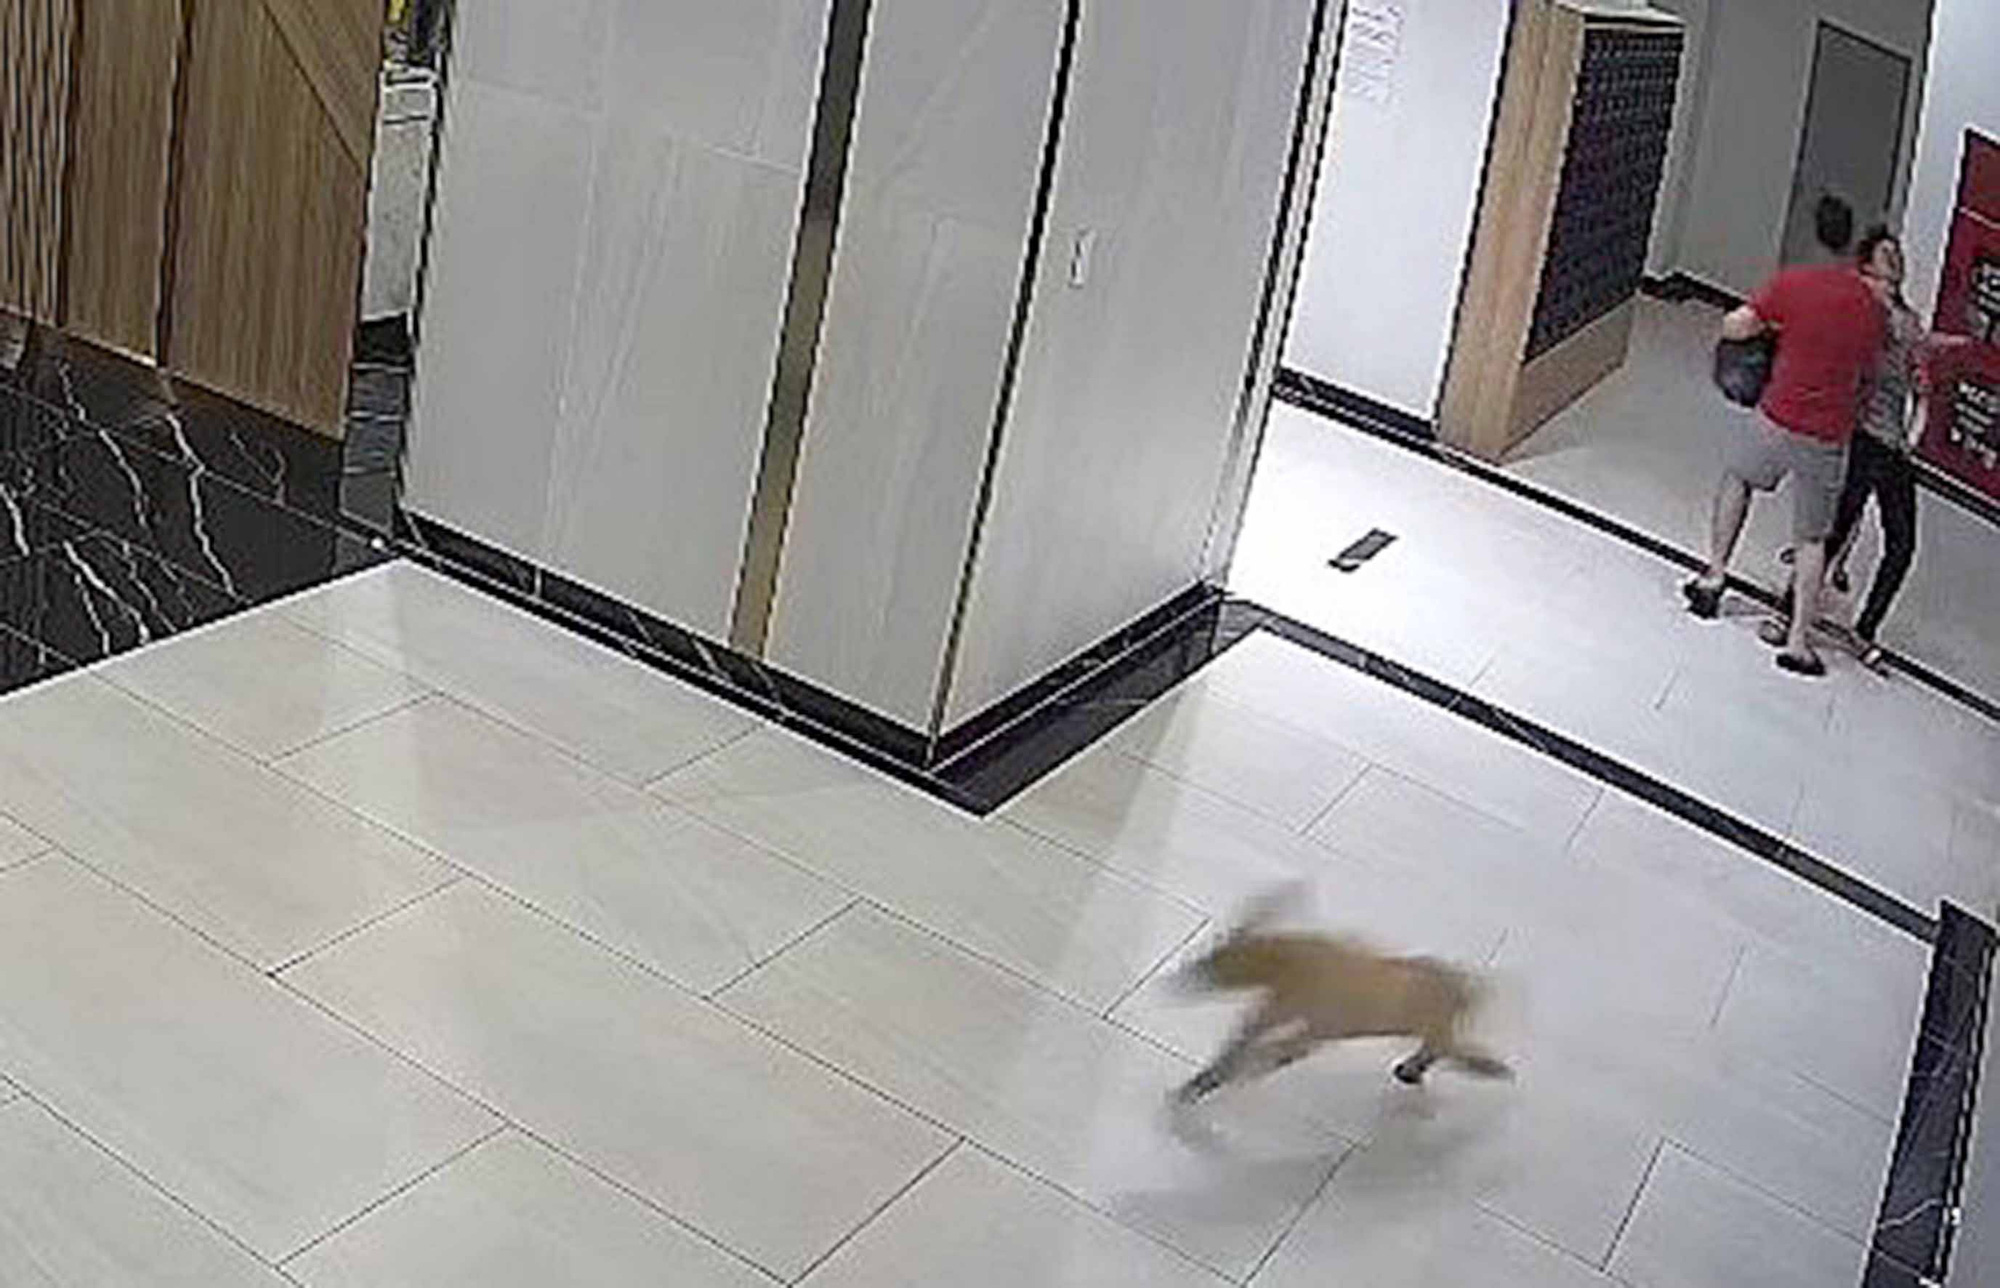 Man punched protecting his son from dog at Ho Chi Minh City apartment building